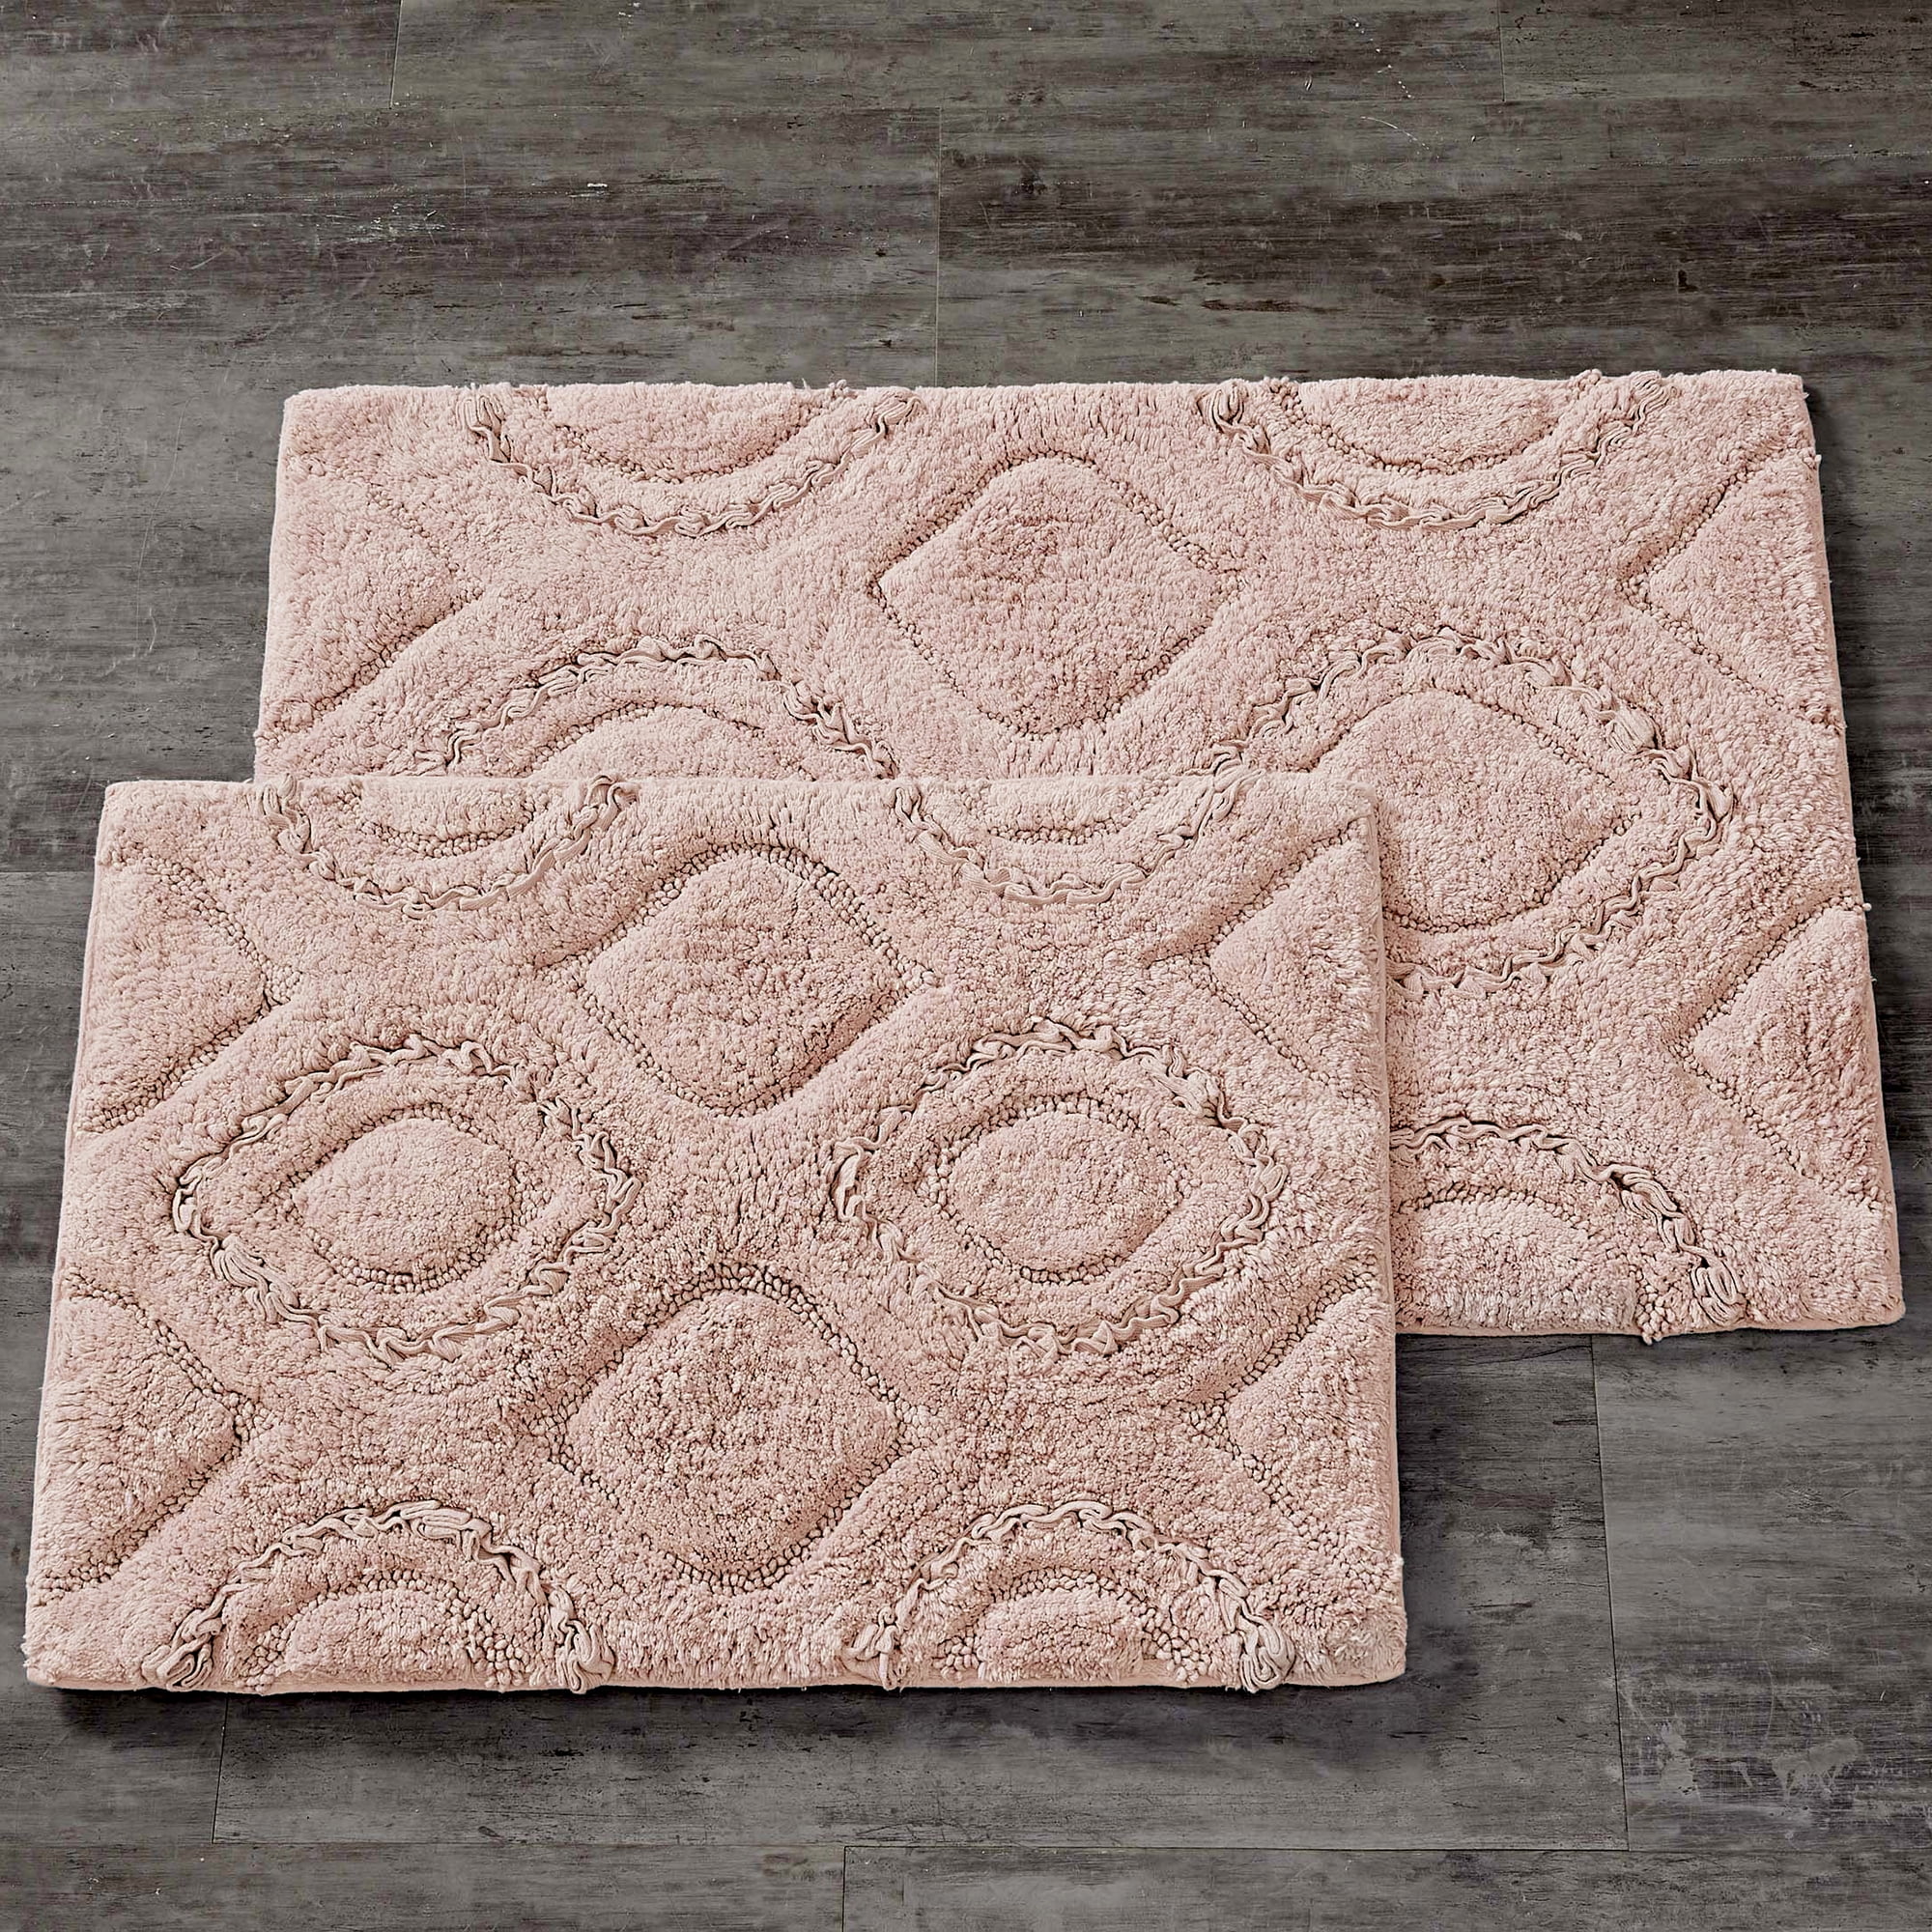 Pink and White Tufted Cotton Bath Mat Washable Bathroom Mat Soft Bathroom  Décor Rugs for Gift 